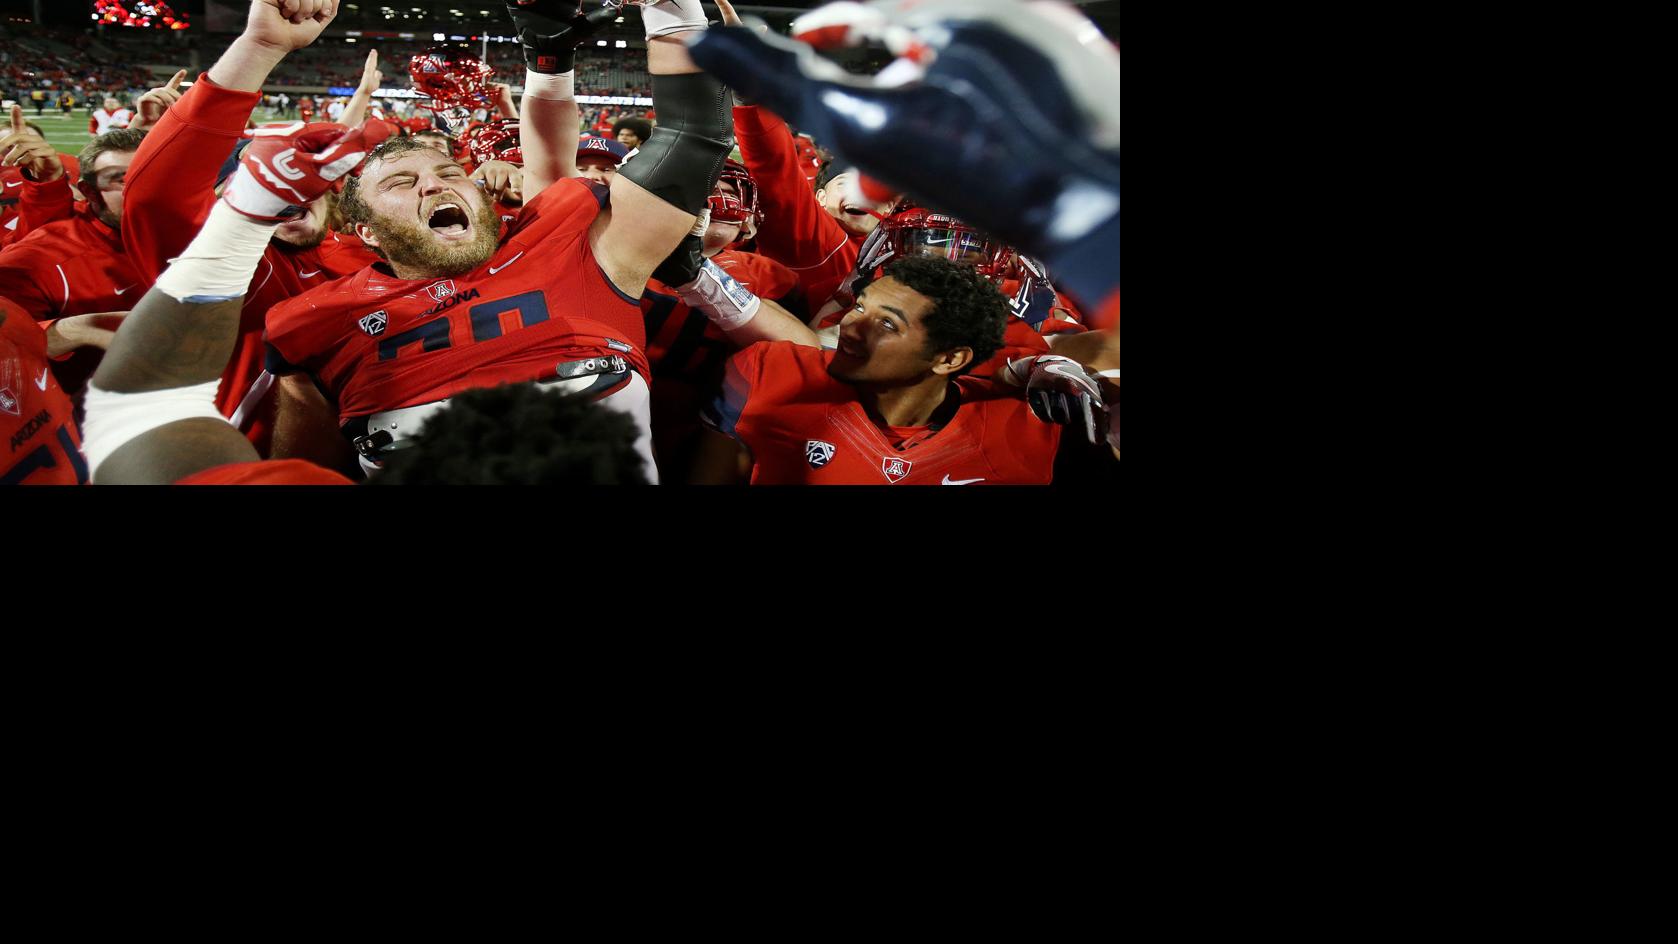 Wildcats Claim 38-35 Victory over Arizona State in Territorial Cup -  University of Arizona Athletics